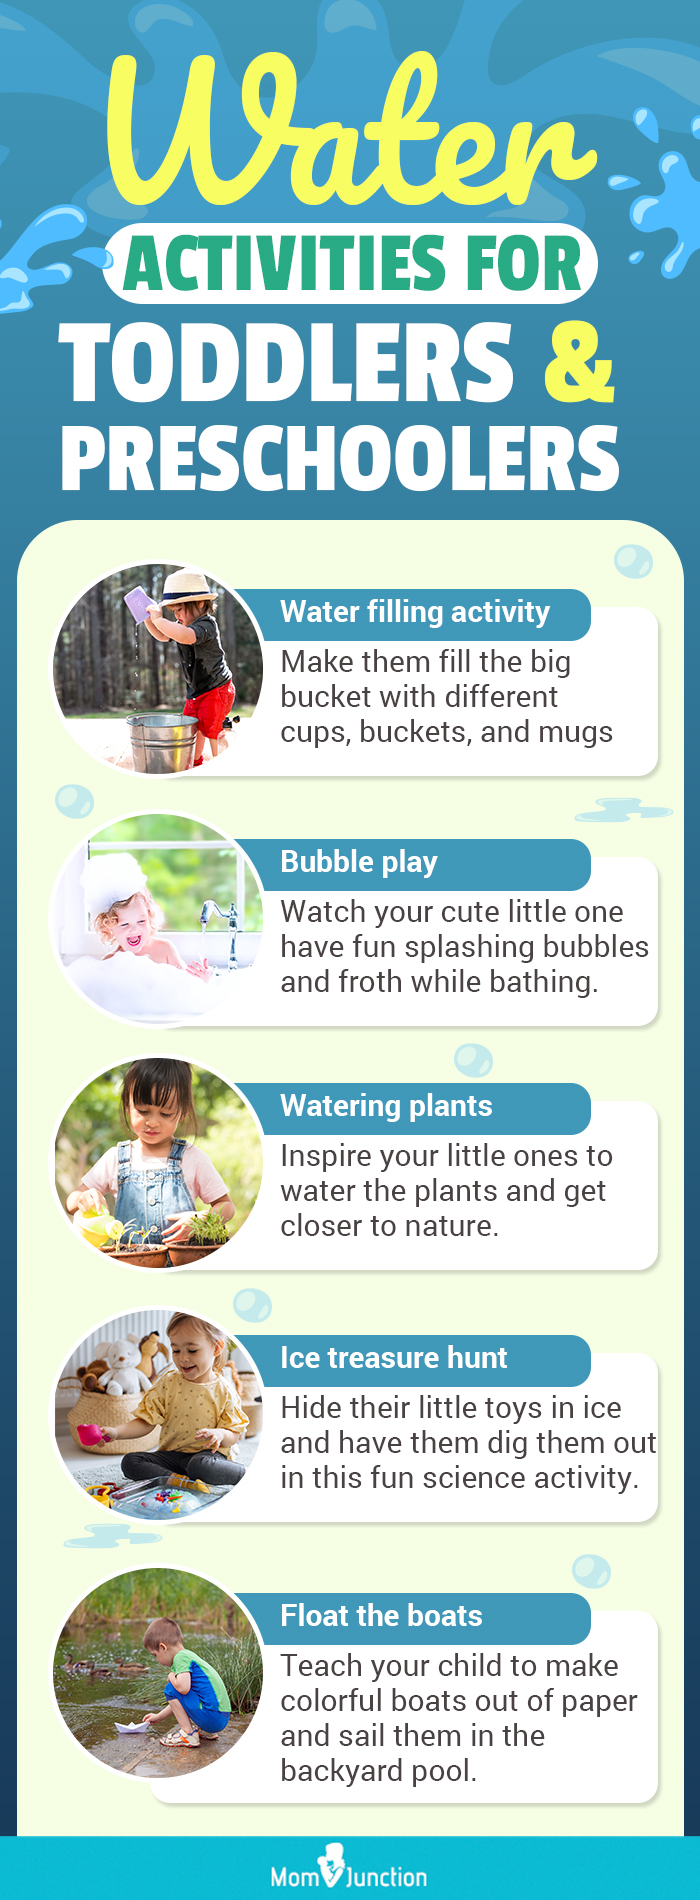 water activities for toddlers and preschoolers (infographic)